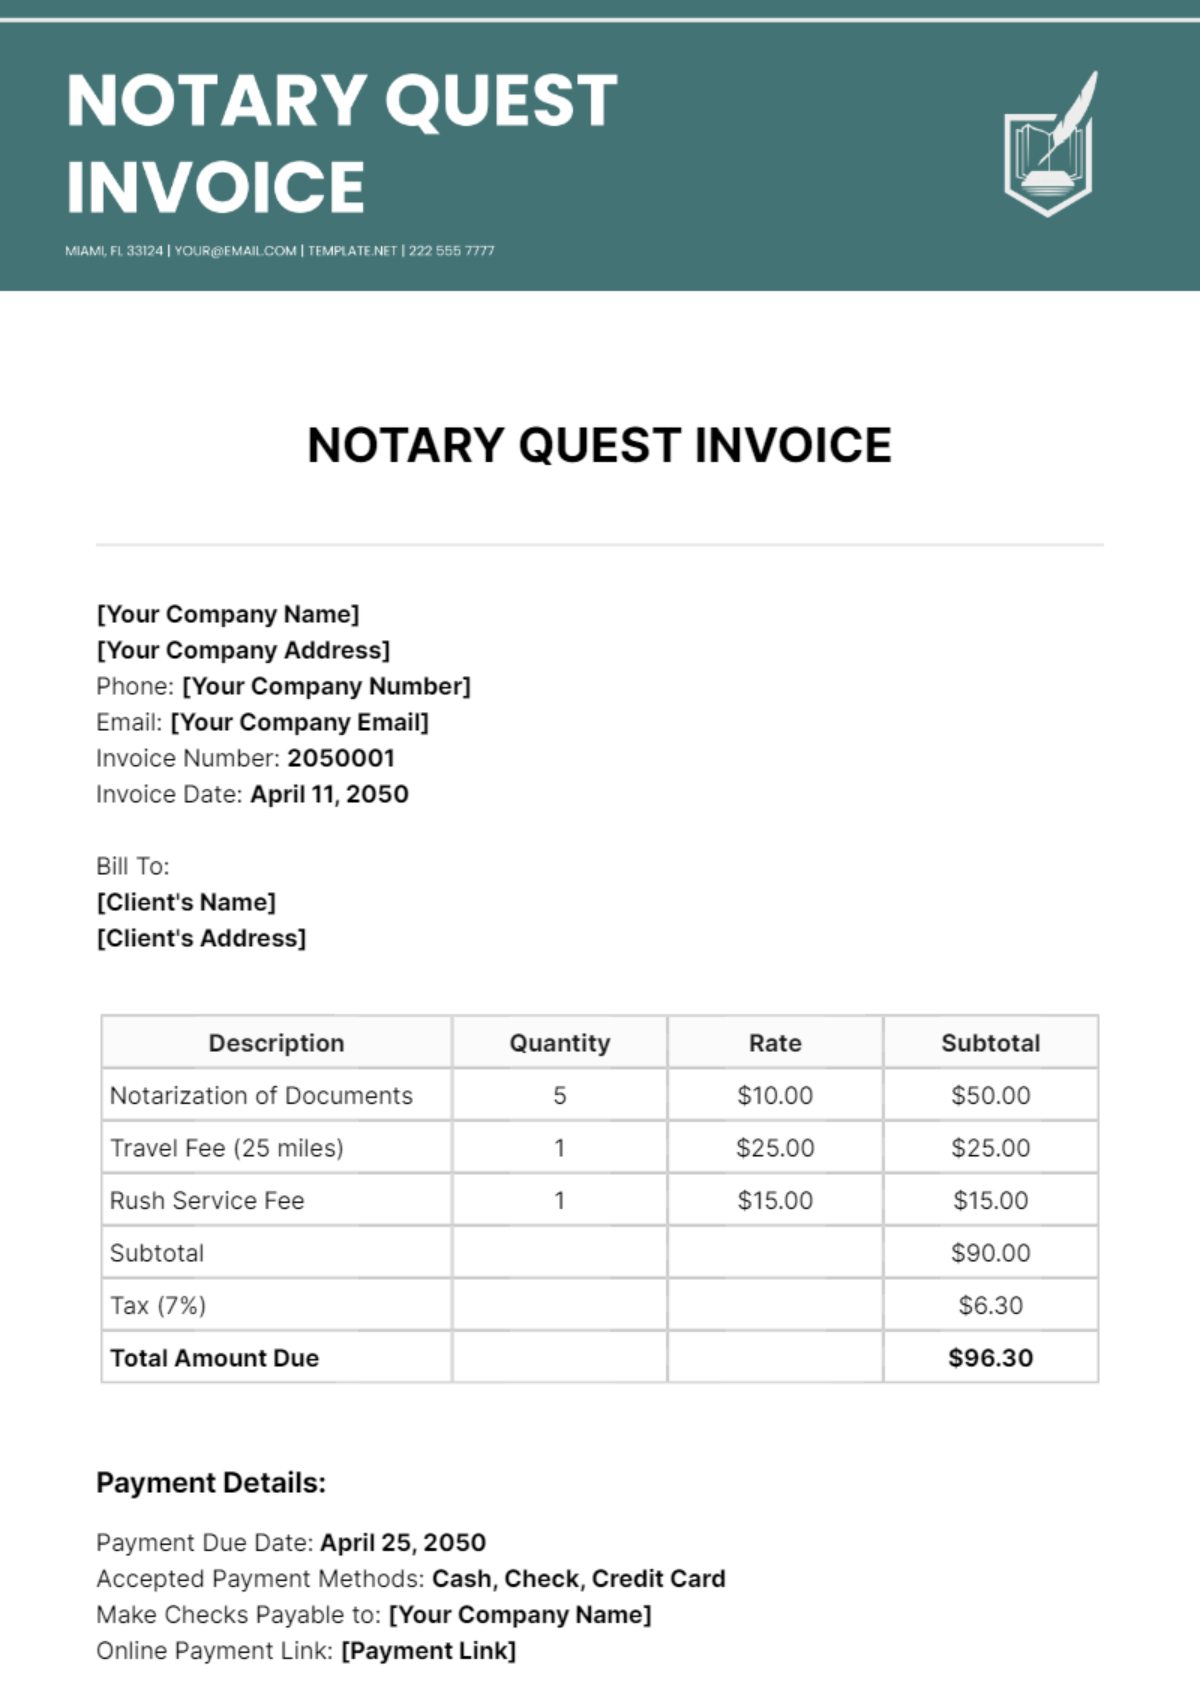 Free Notary Quest Invoice Template